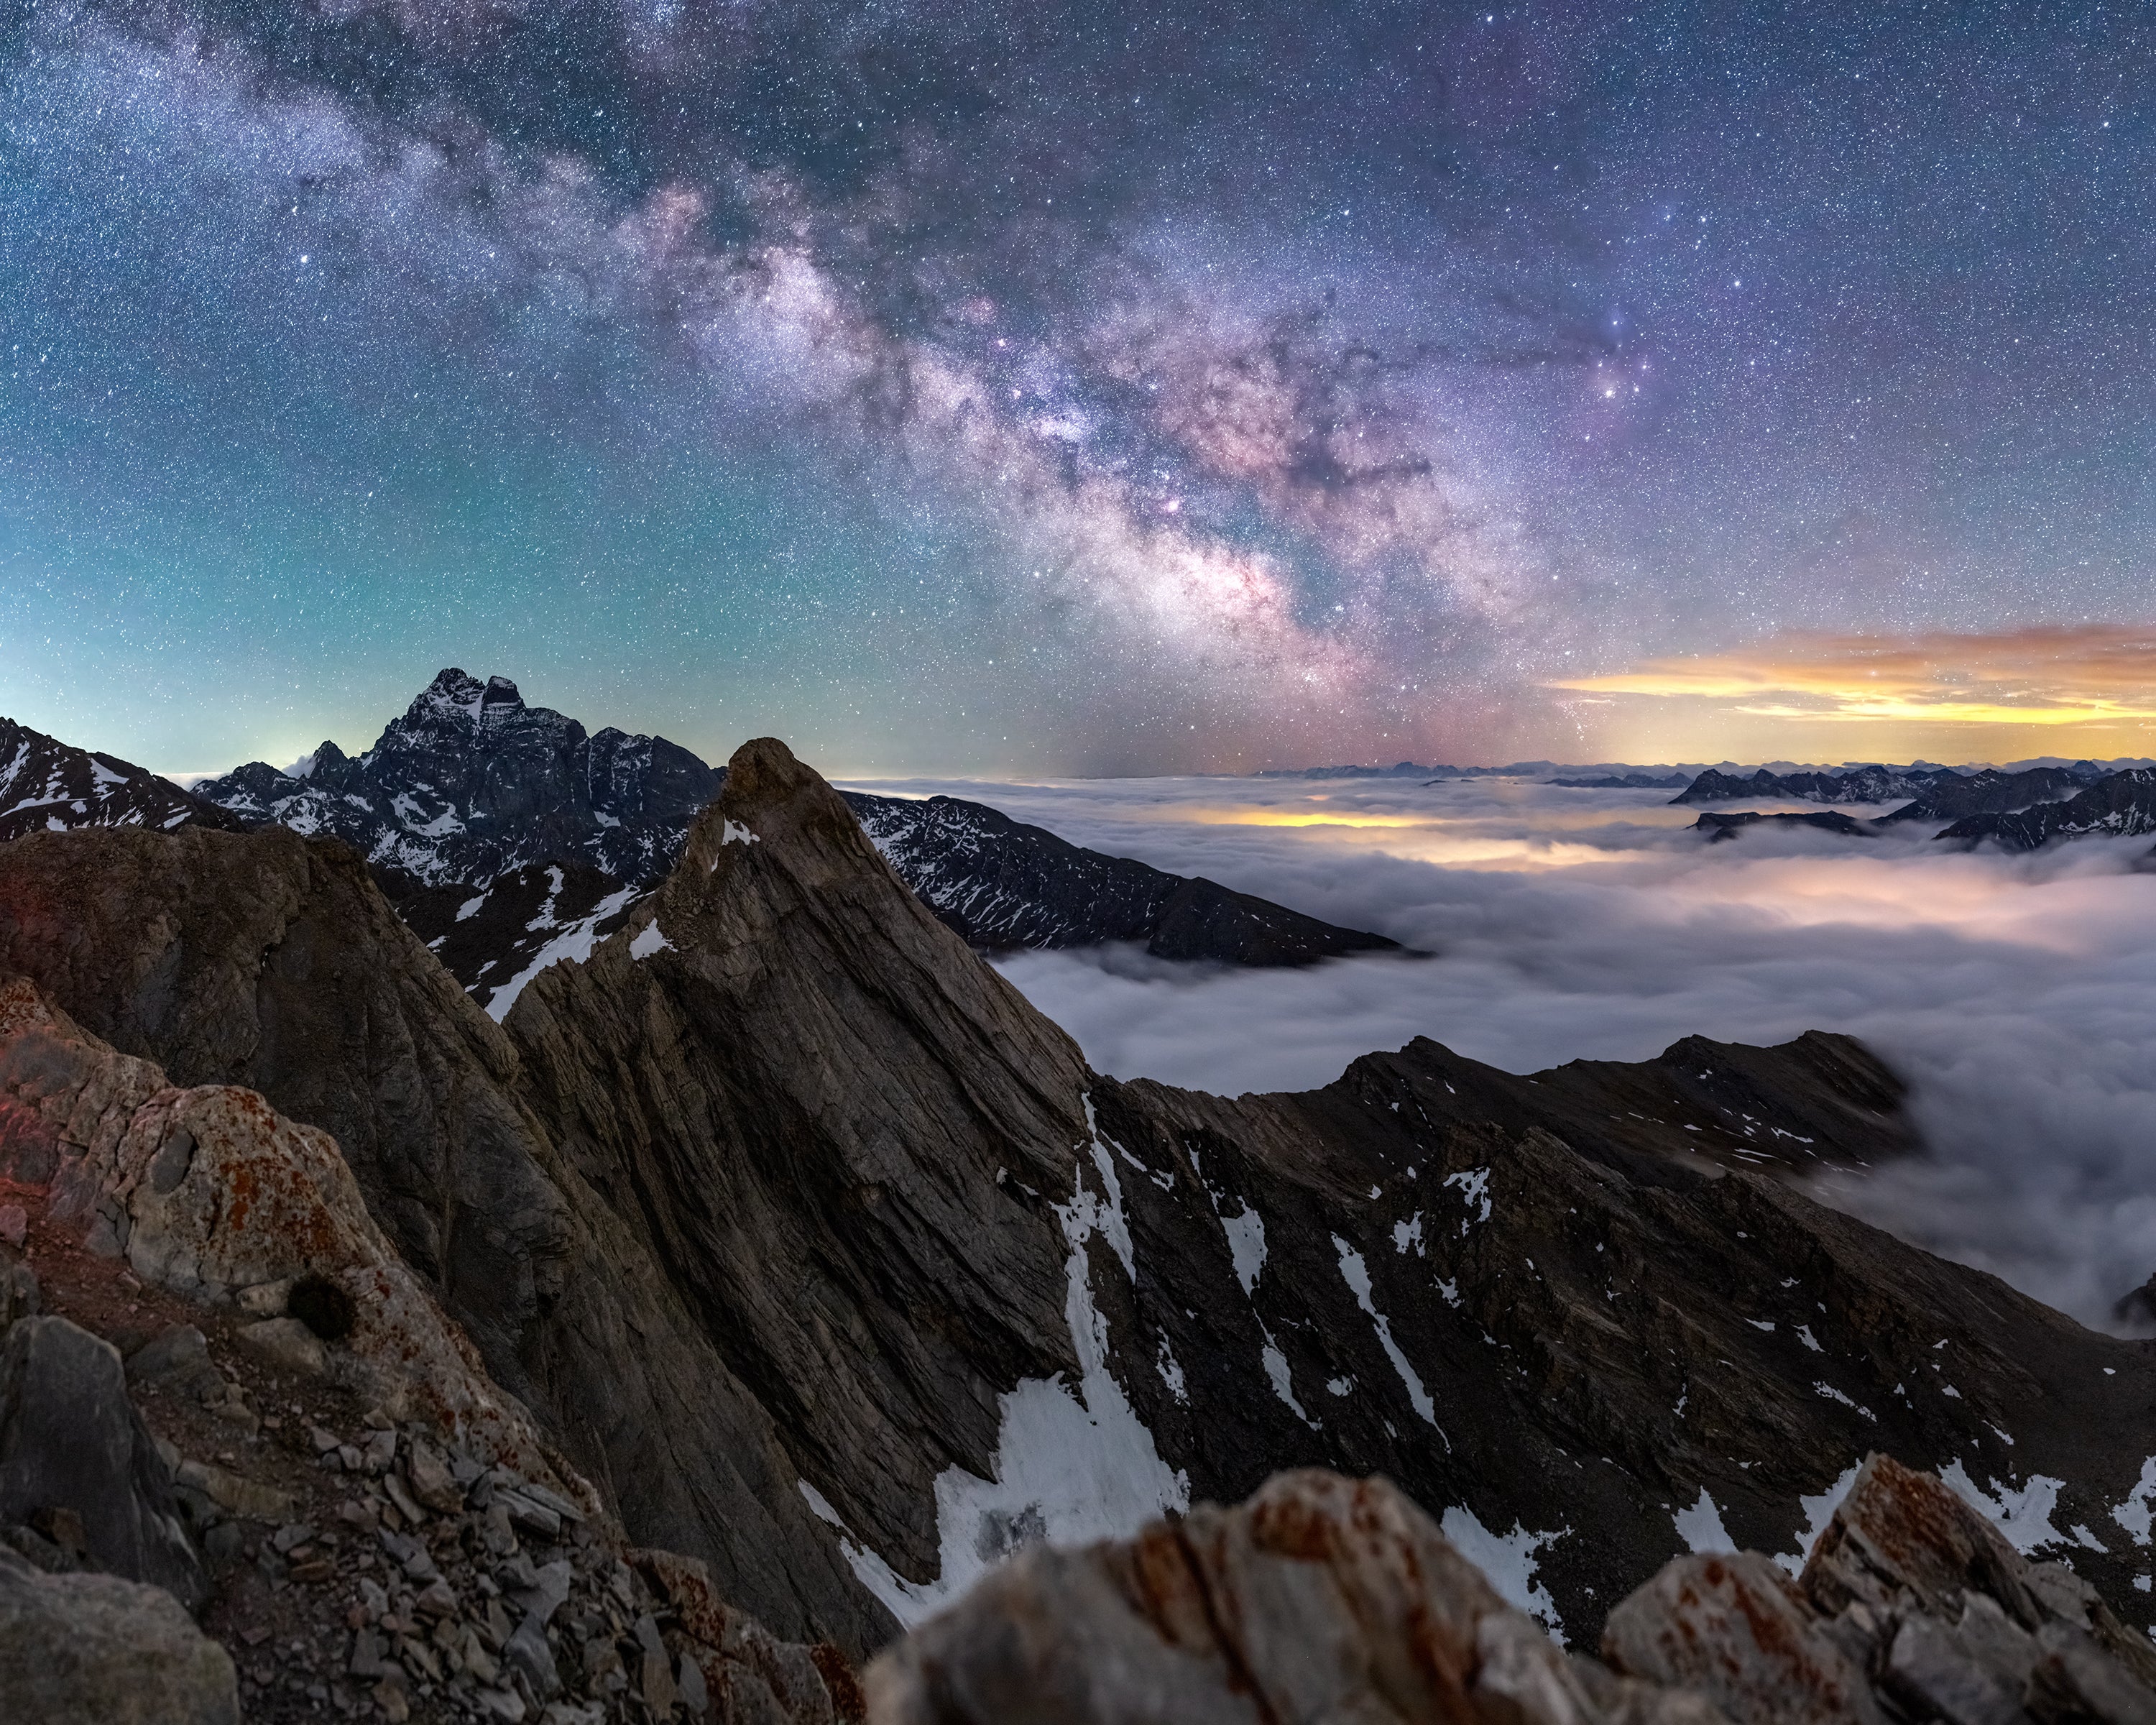 The Milky Way over Pain de Sucre, a mountain on the border of France and Italy. (Photo: Jeff Graphy)